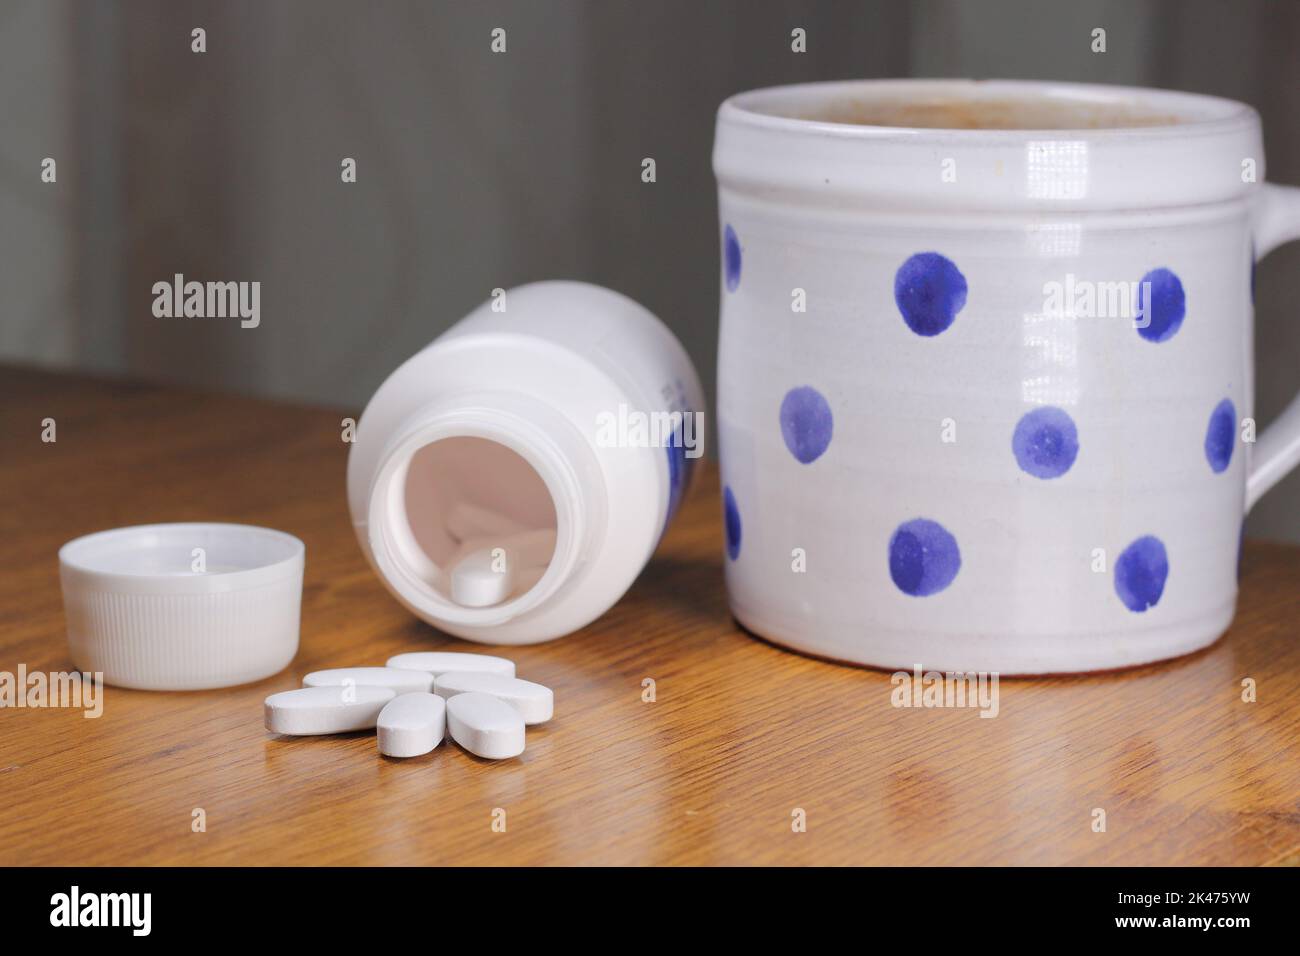 Anti-Radiation Pills, Iodine tablets, and tablets for radiation protection on the wooden table with a white medical jar and blue polka dot mug Stock Photo